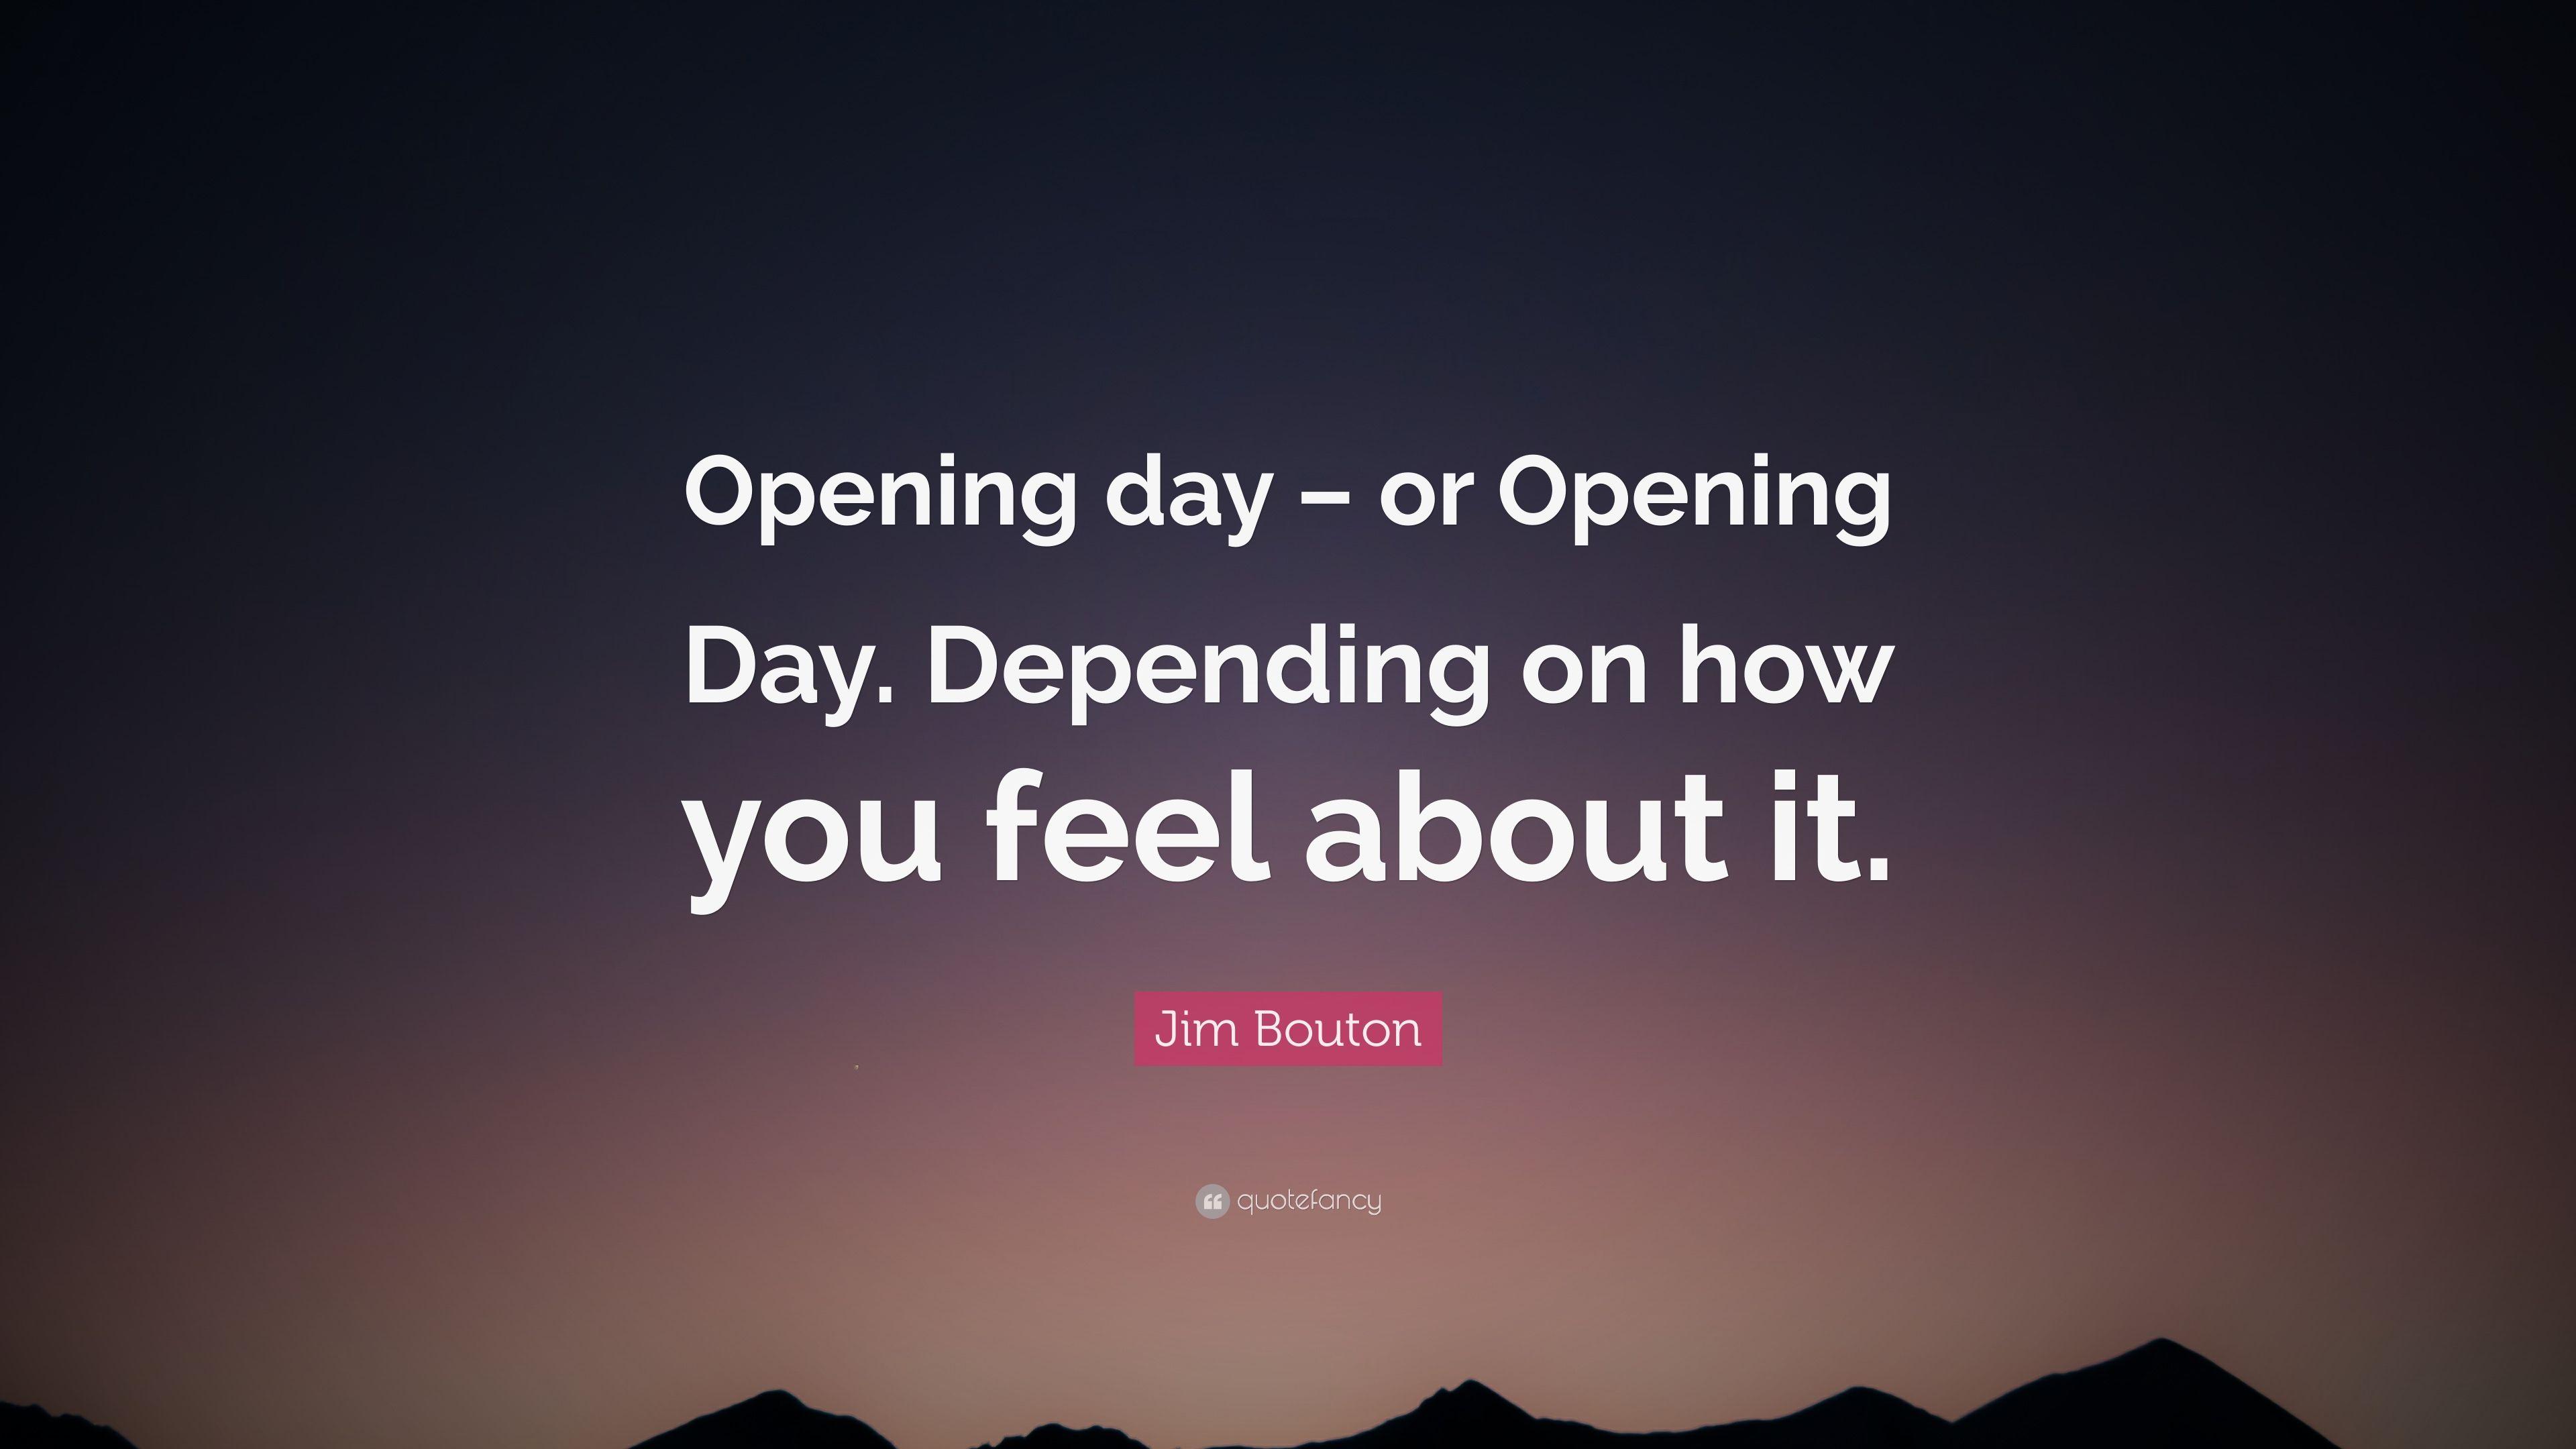 Jim Bouton Quote: “Opening day